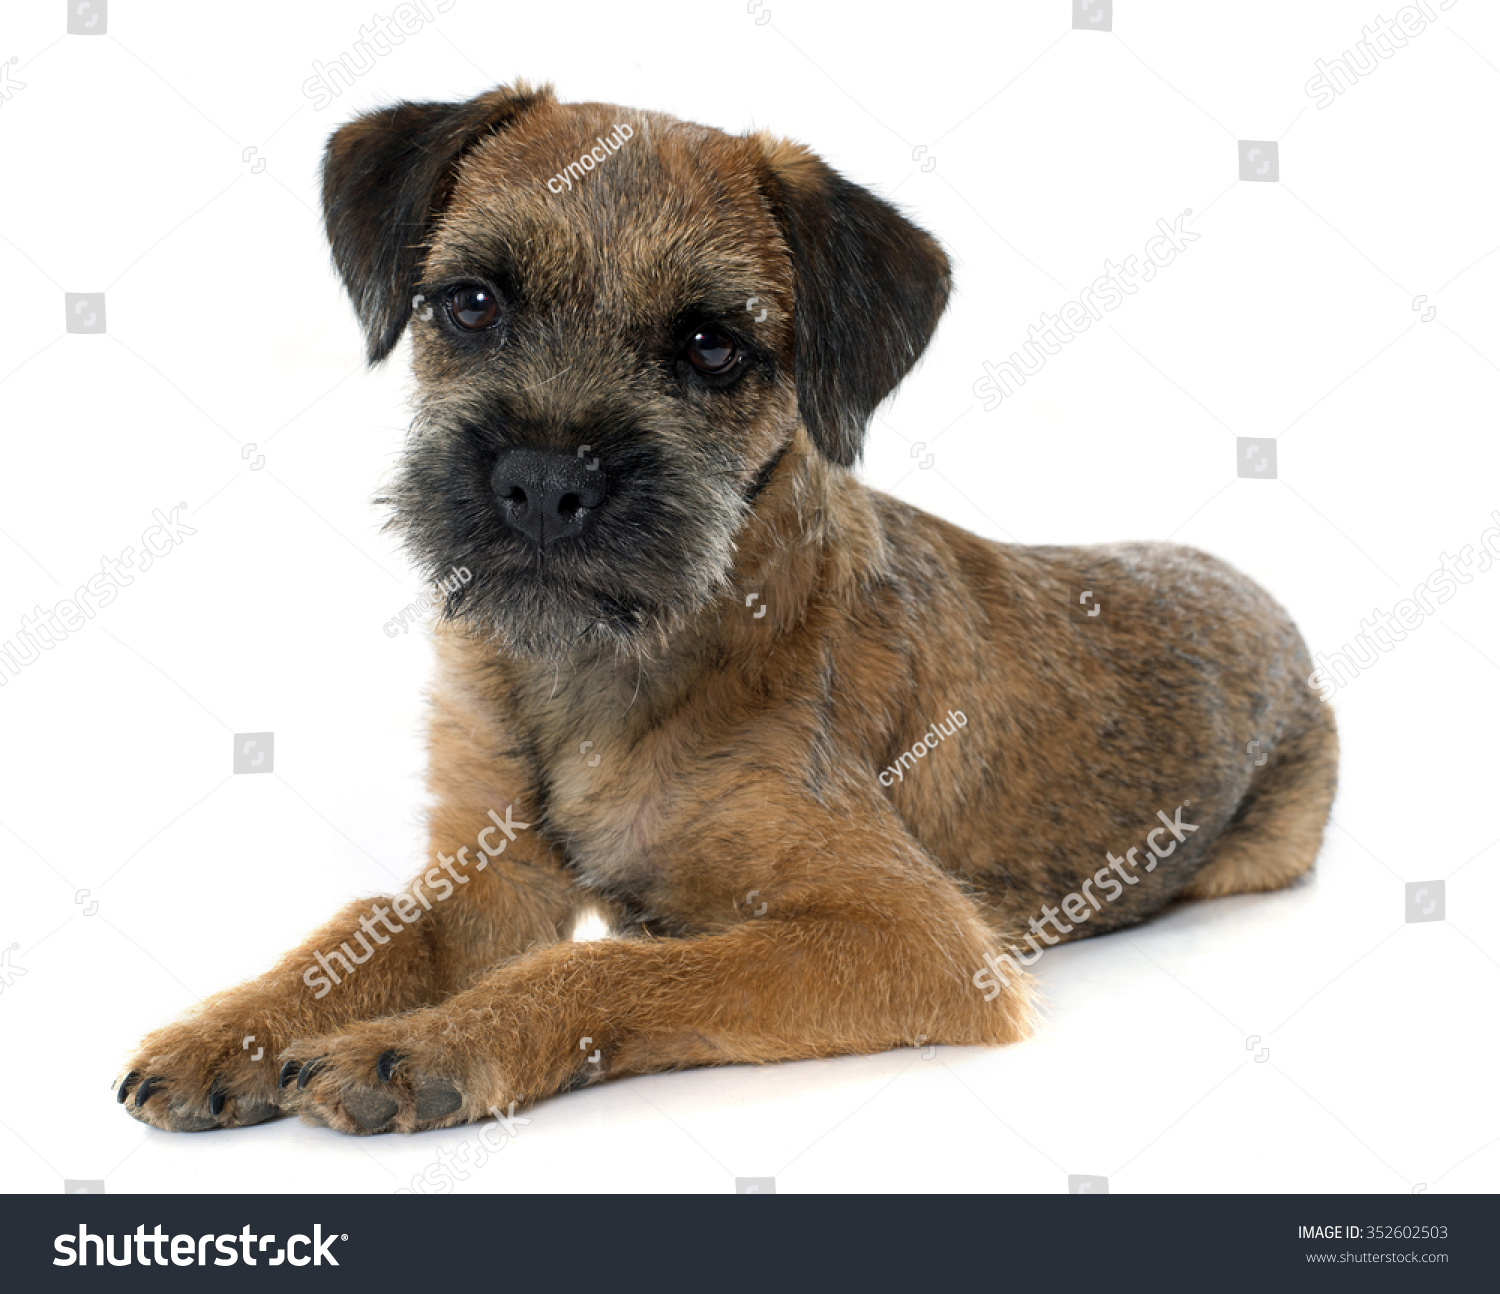 purebred border terrier in front of white background #352602503